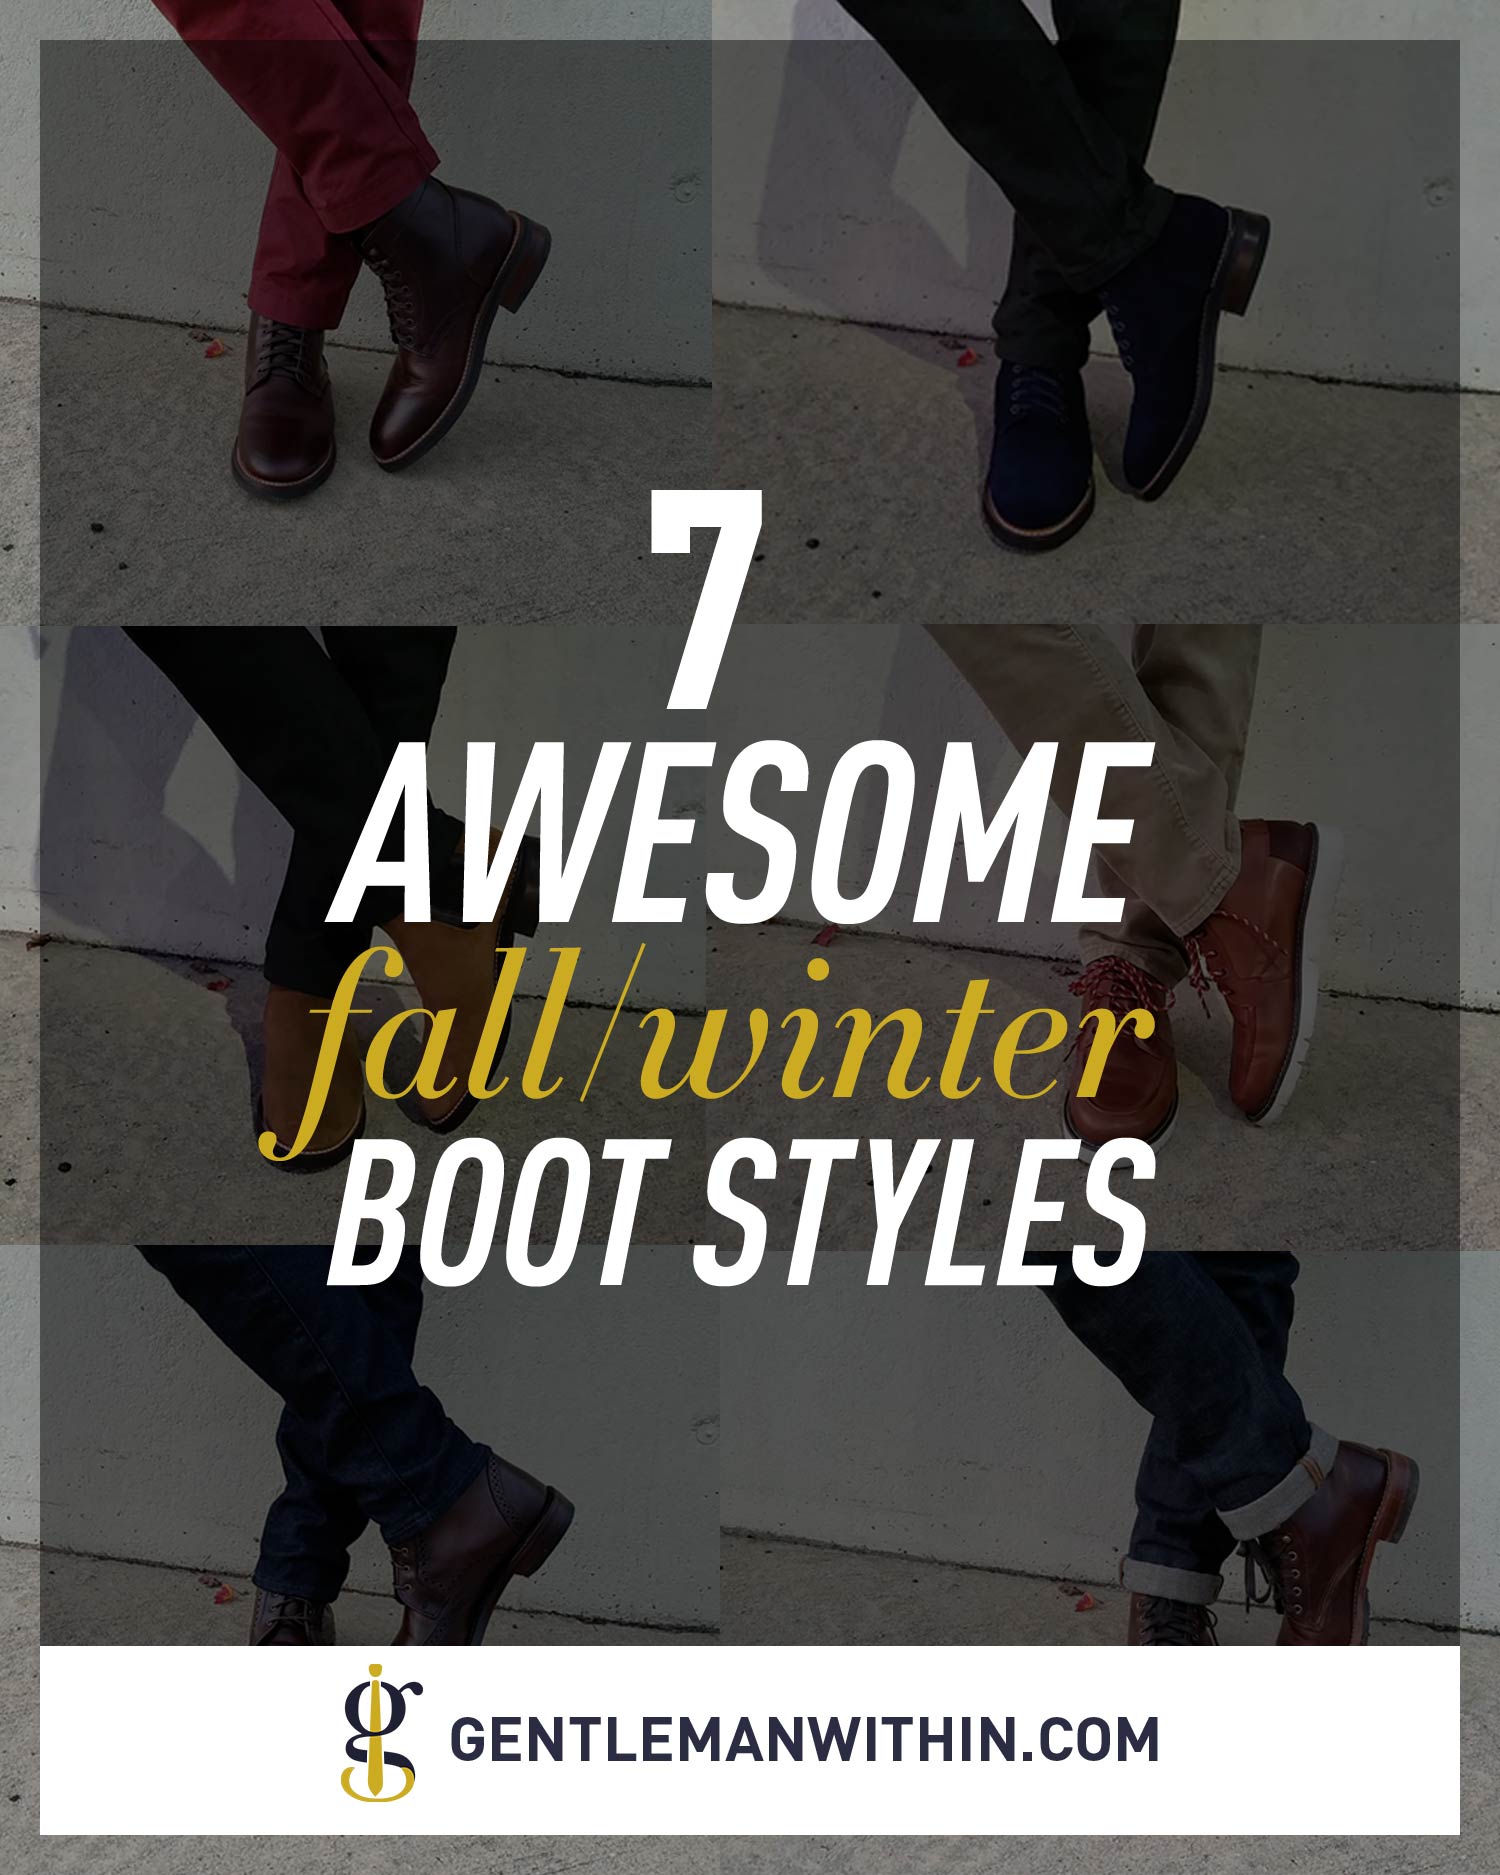 7 Awesome Boot Styles For Fall/Winter + Styling Inspiration | GENTLEMAN WITHIN